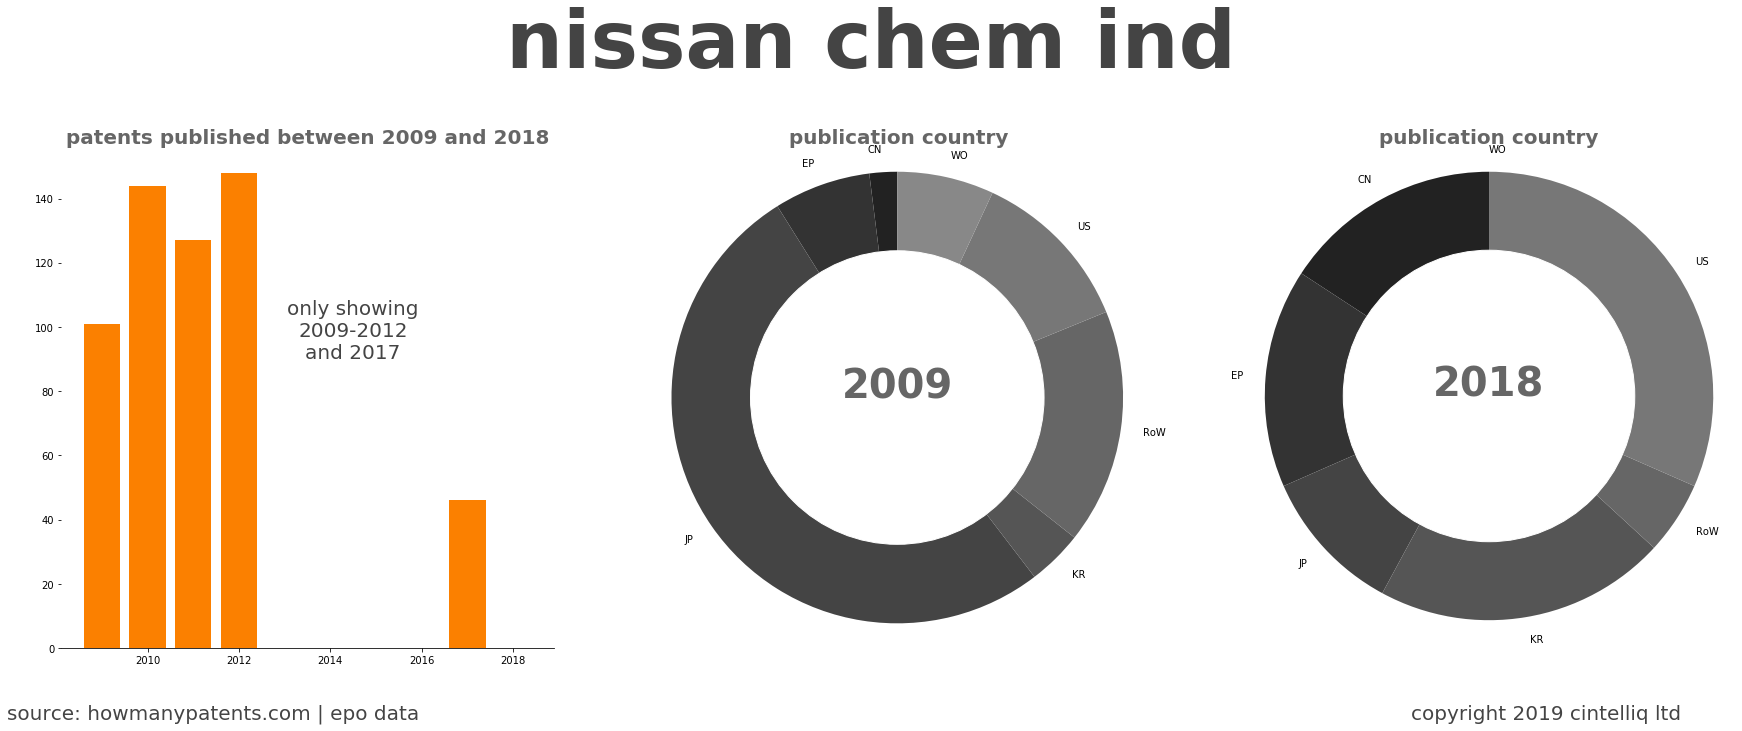 summary of patents for Nissan Chem Ind